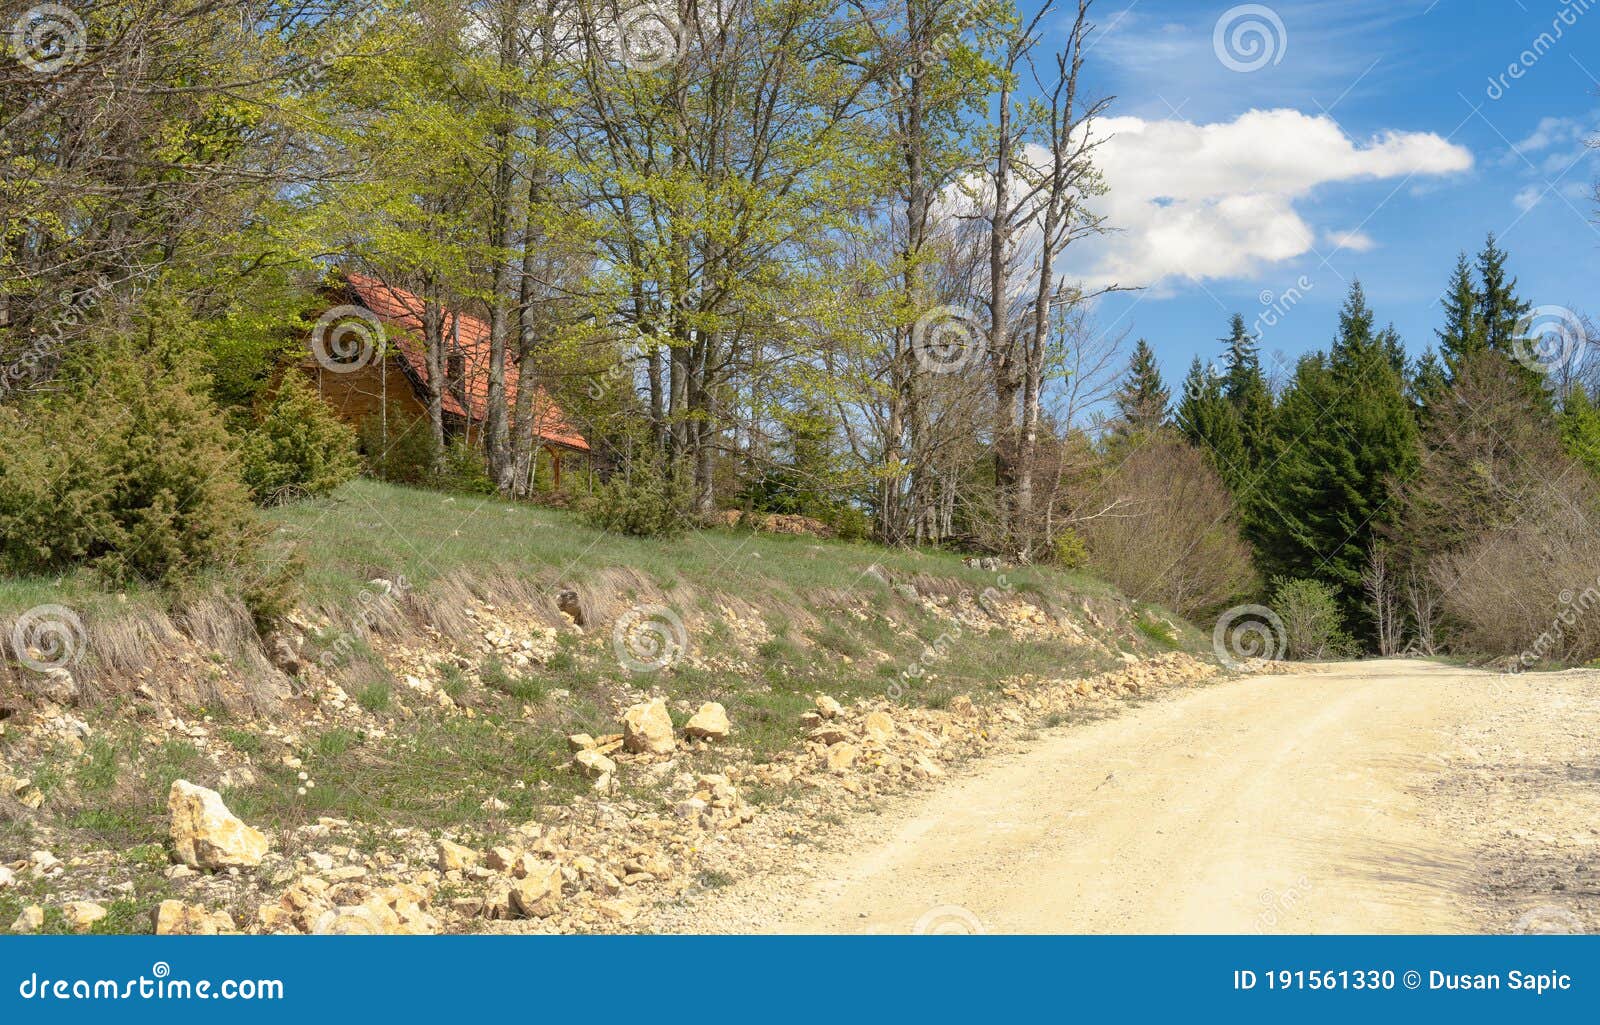 a cottage near the unpaved road.village scenary image.